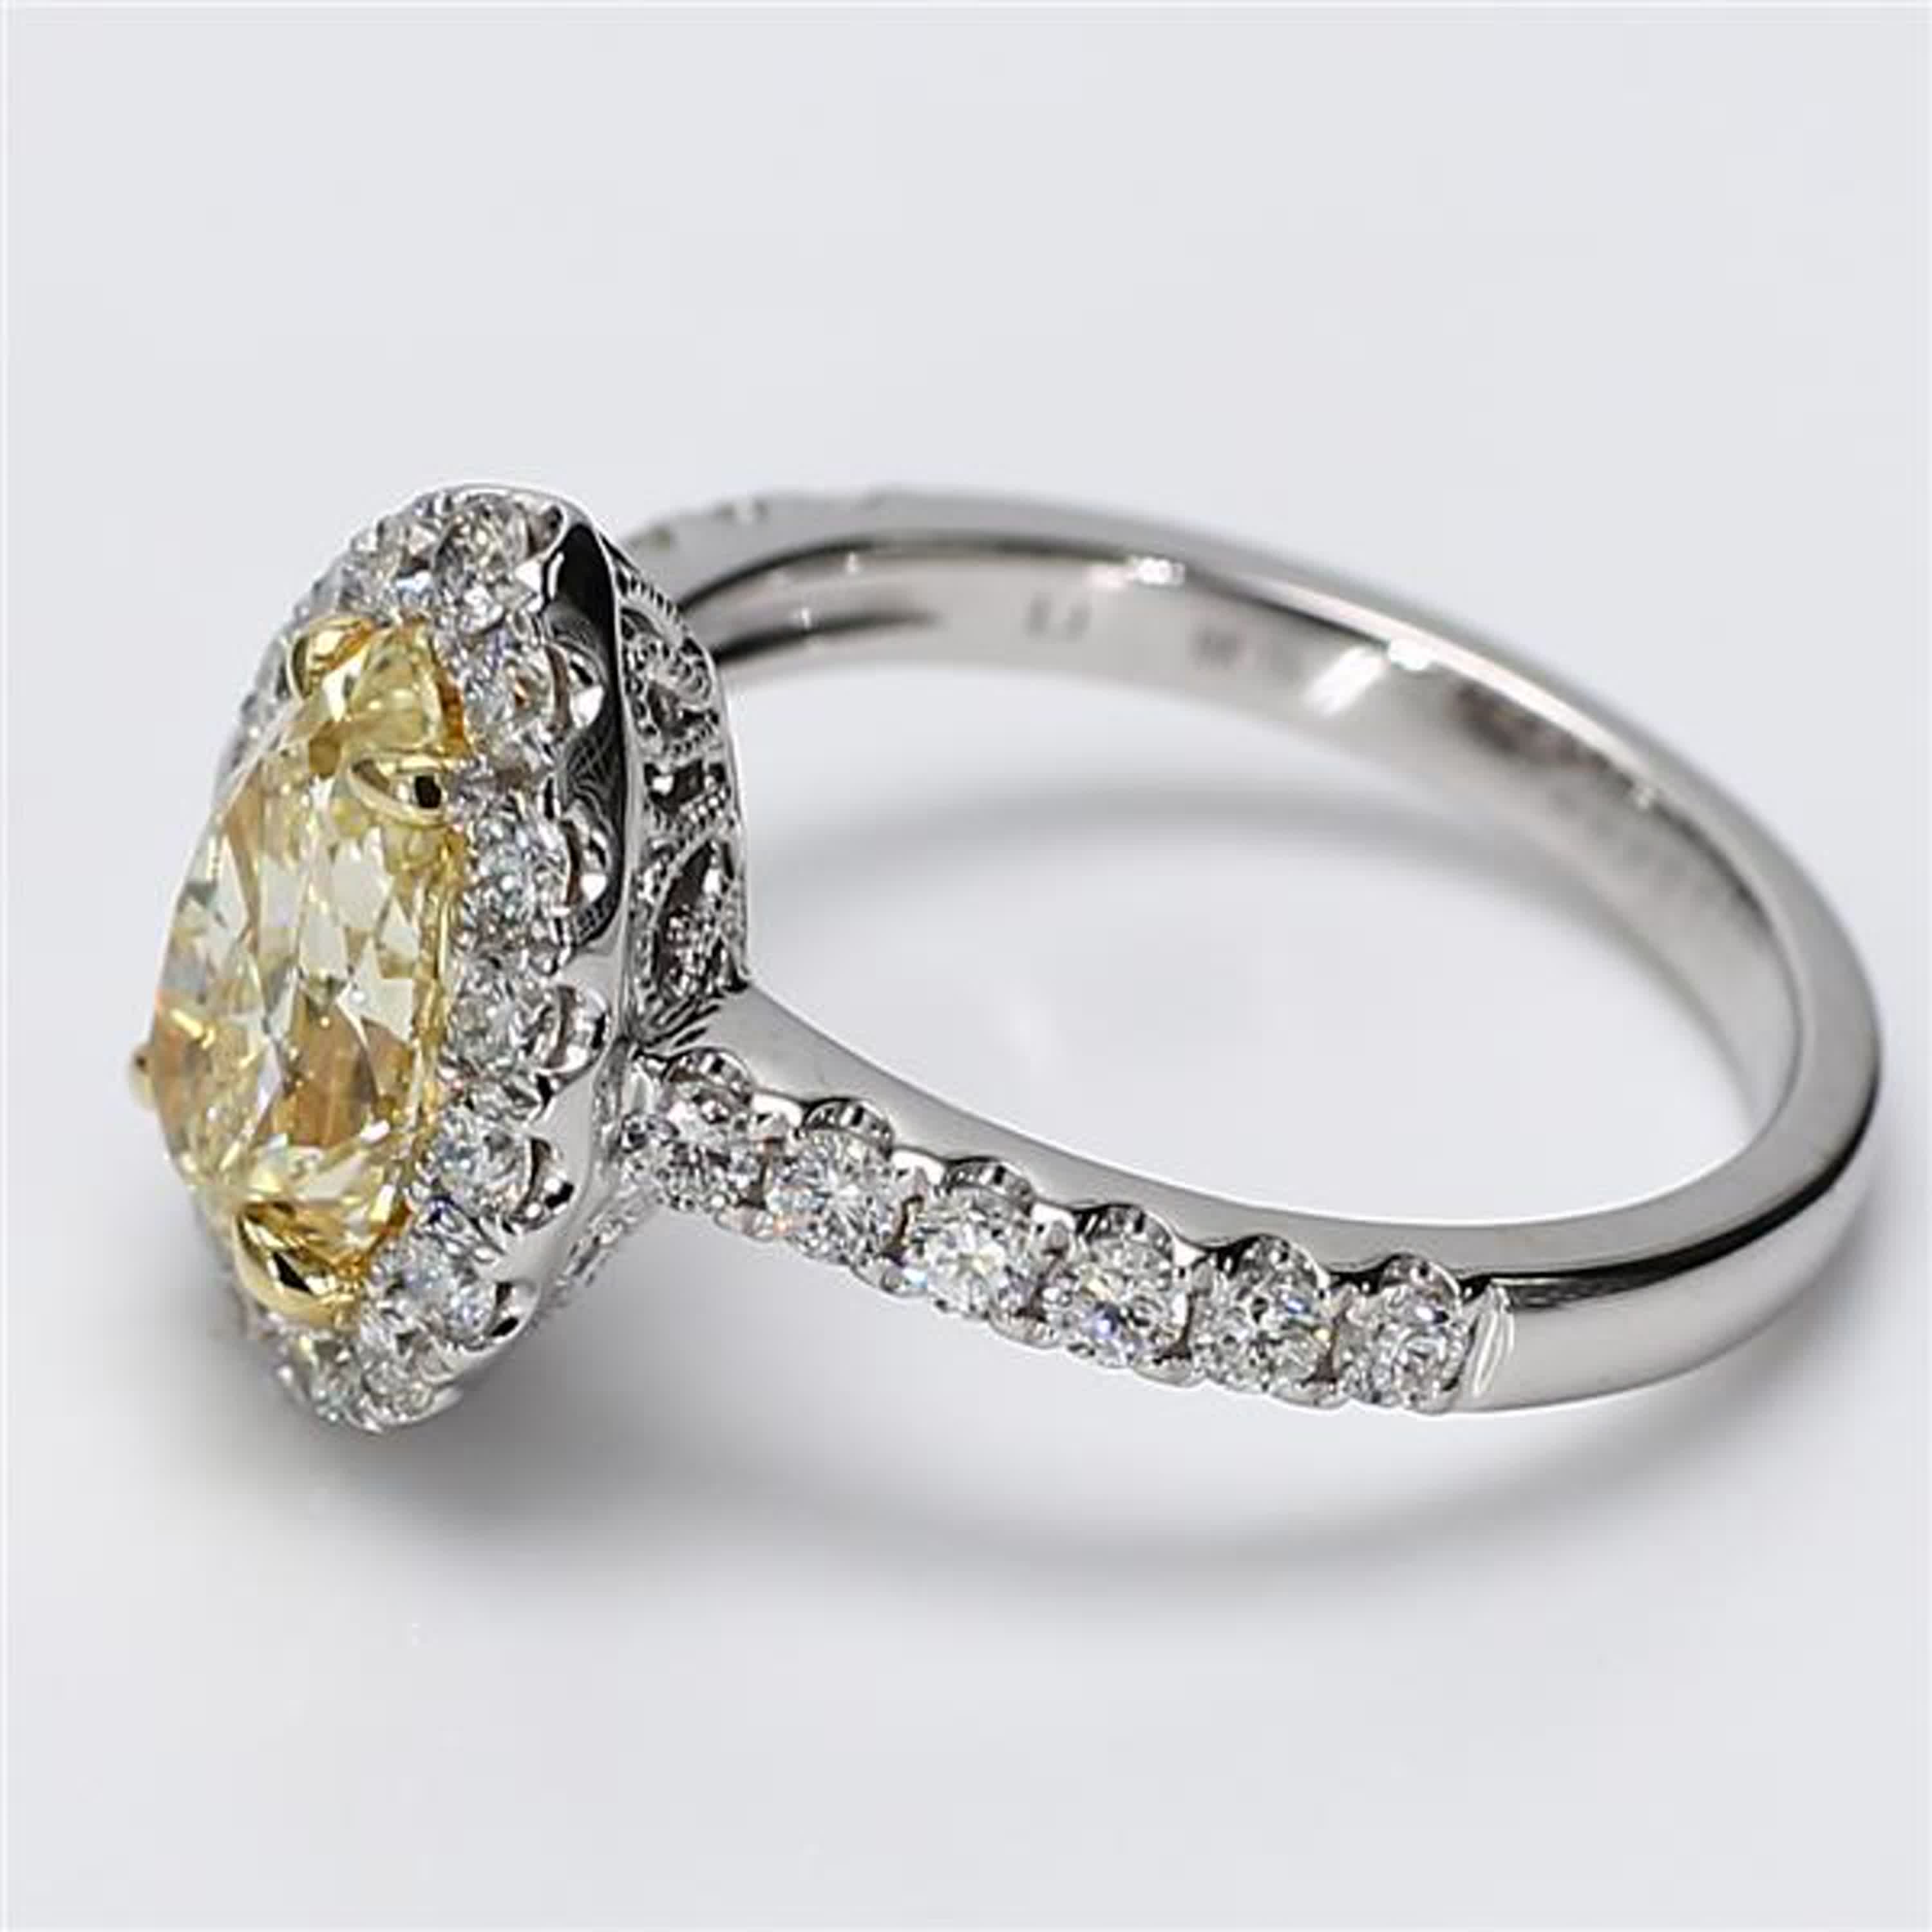 GIA Certified Natural Yellow Pear and White Diamond 2.86 Carat TW Gold Ring